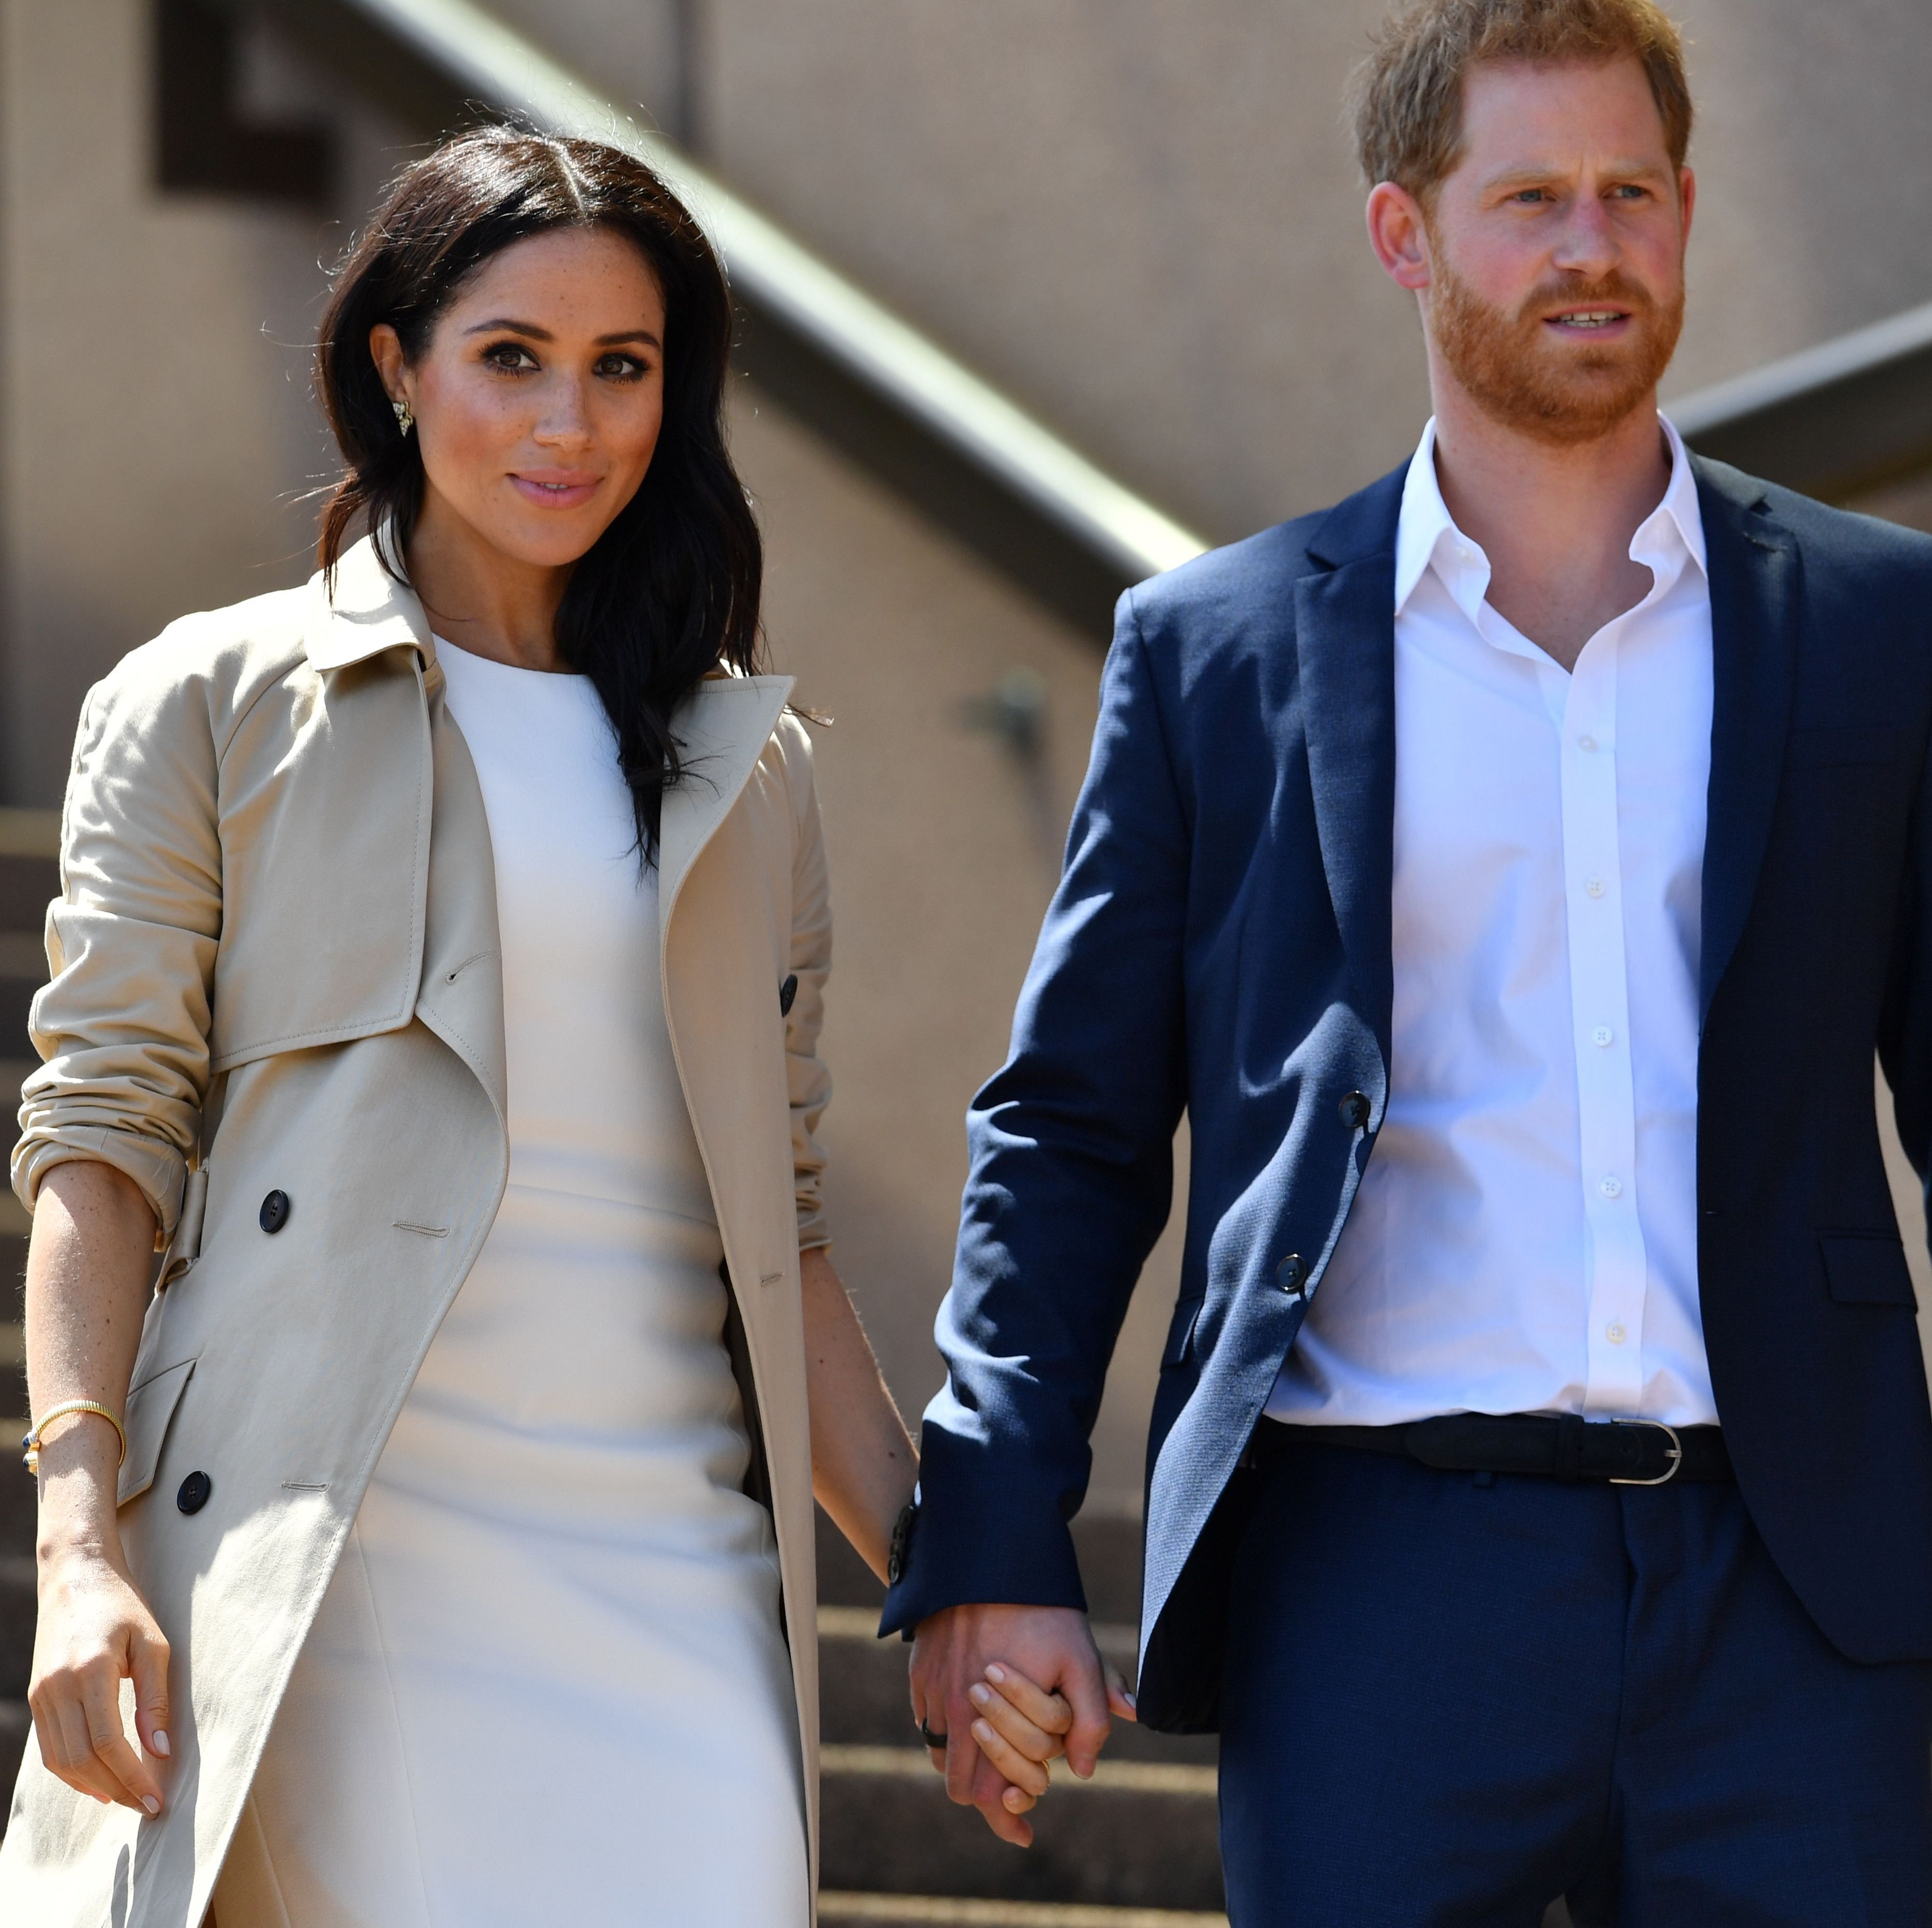 Meghan Markle and Prince Harry Are ‘Sick and Tired of’ People Taking ‘Cheap Shots at Them’